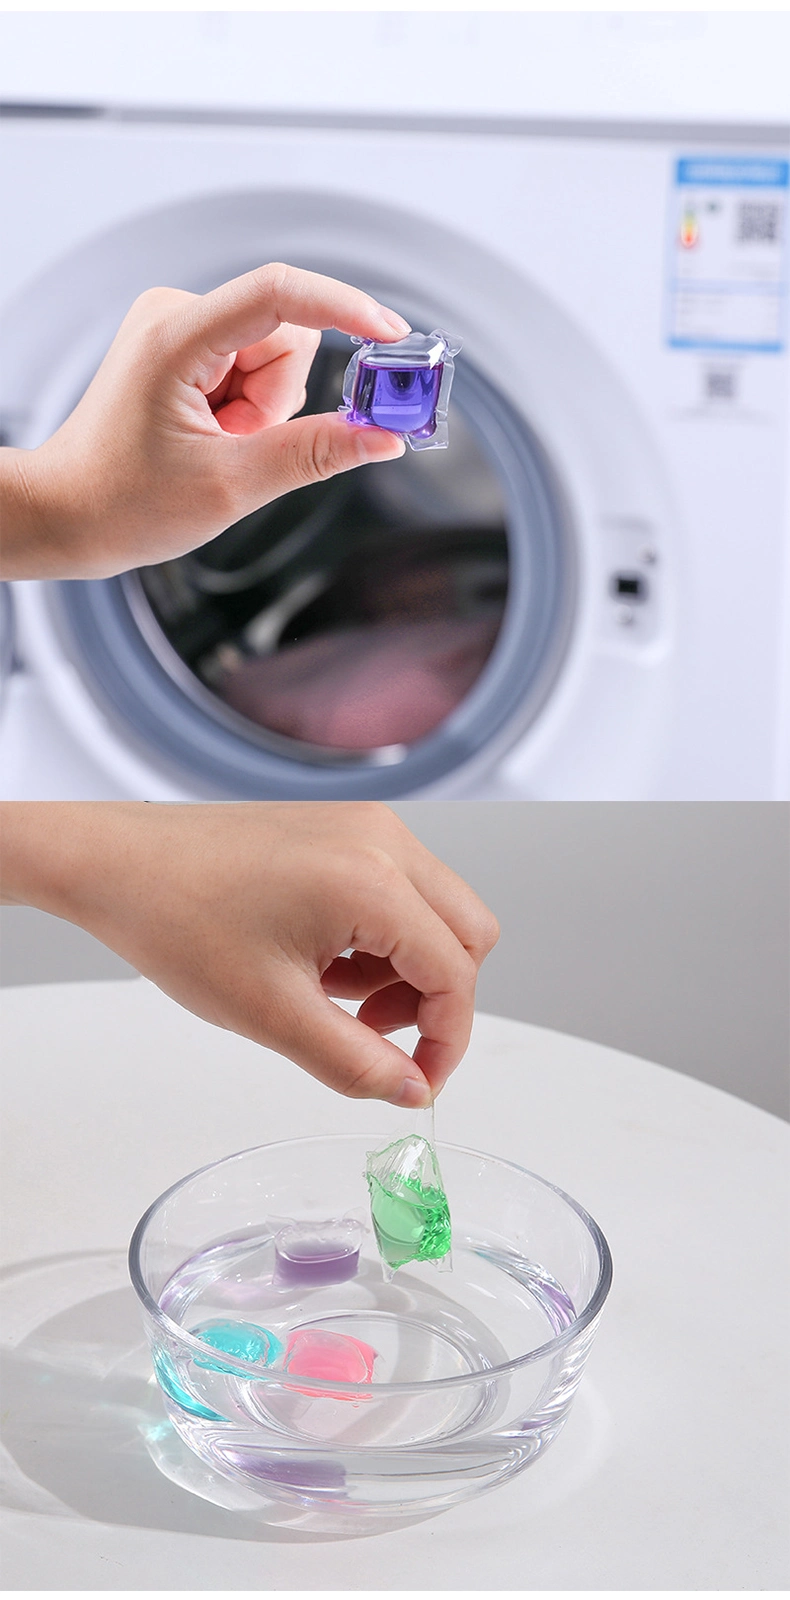 Laundry Detergent Concentrator Washing of Environmentally Friendly Remaining Fragrance Laundry Beads